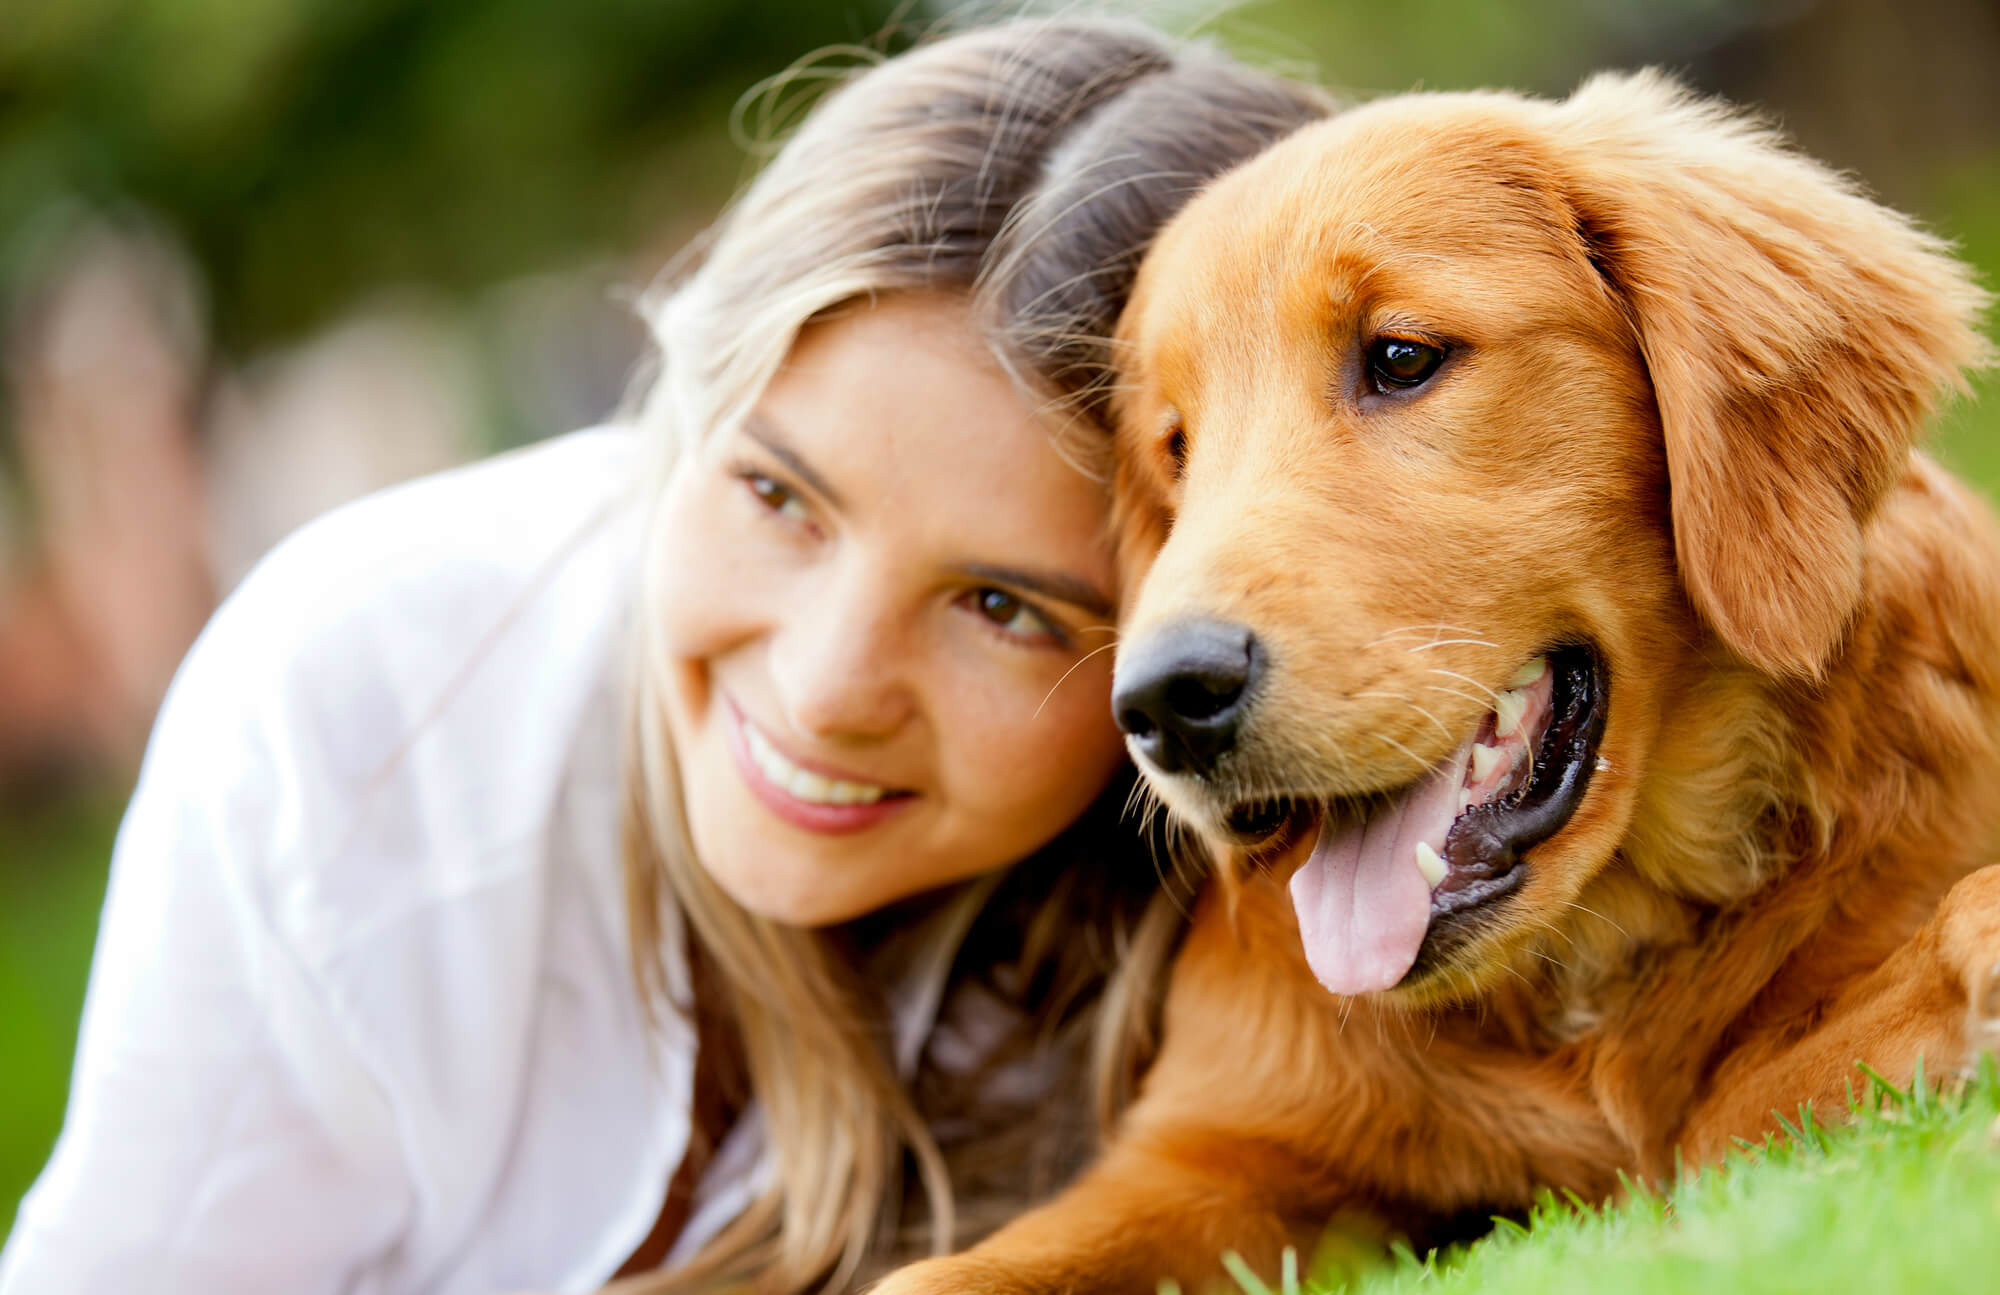 What can Reiki do for your pets?